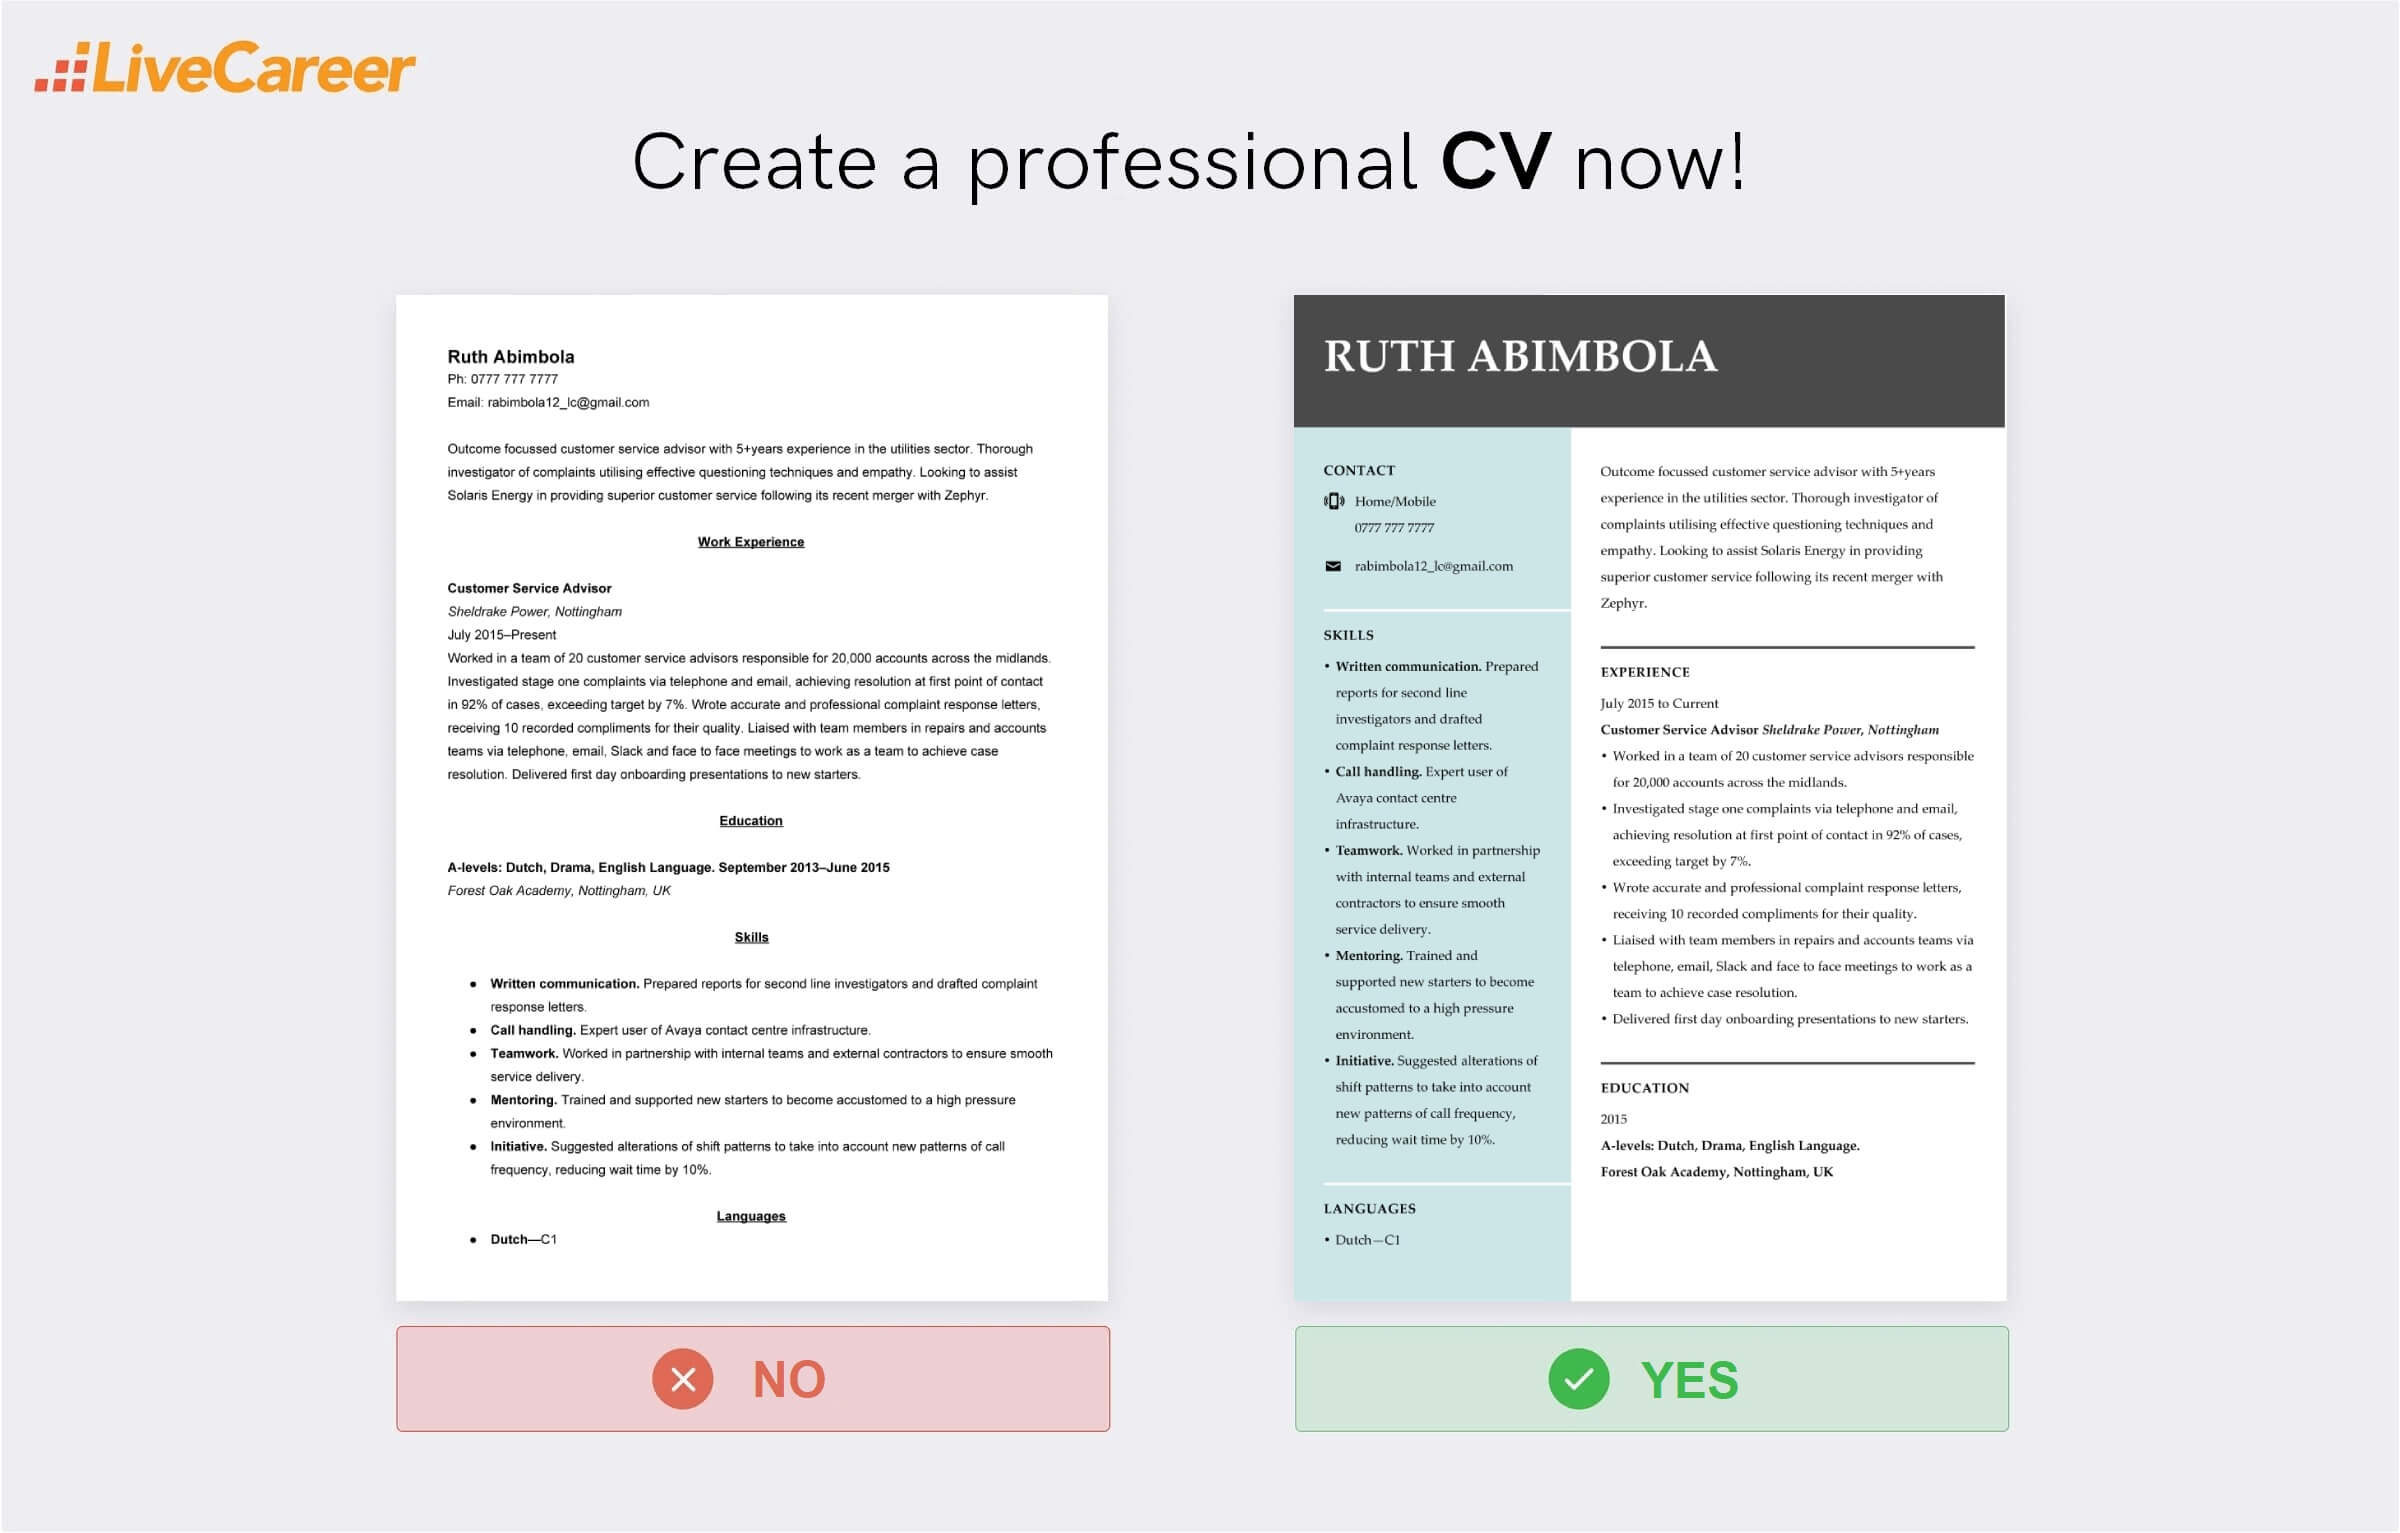 29+ Examples of Effective Communication Skills for Your CV